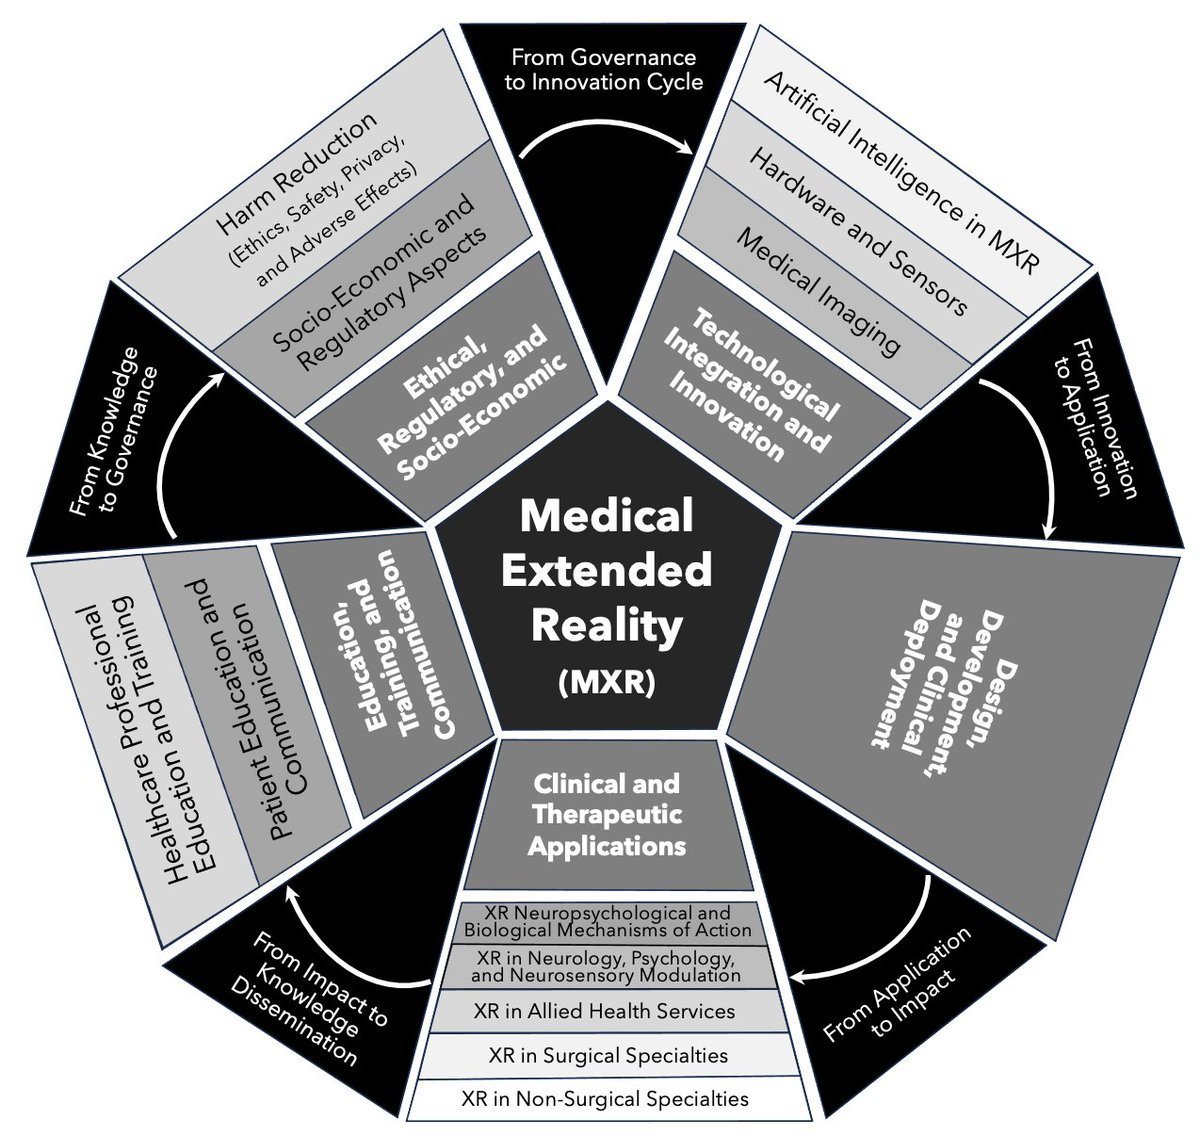 'Defining the future language of medicine' - @CedarsSinai covers the new @theAMXRA guideline defining the emerging field of Medical Extended Reality (#MXR) published in the Journal of MXR: cedars-sinai.org/newsroom/defin… Full guideline: liebertpub.com/doi/10.1089/jm…